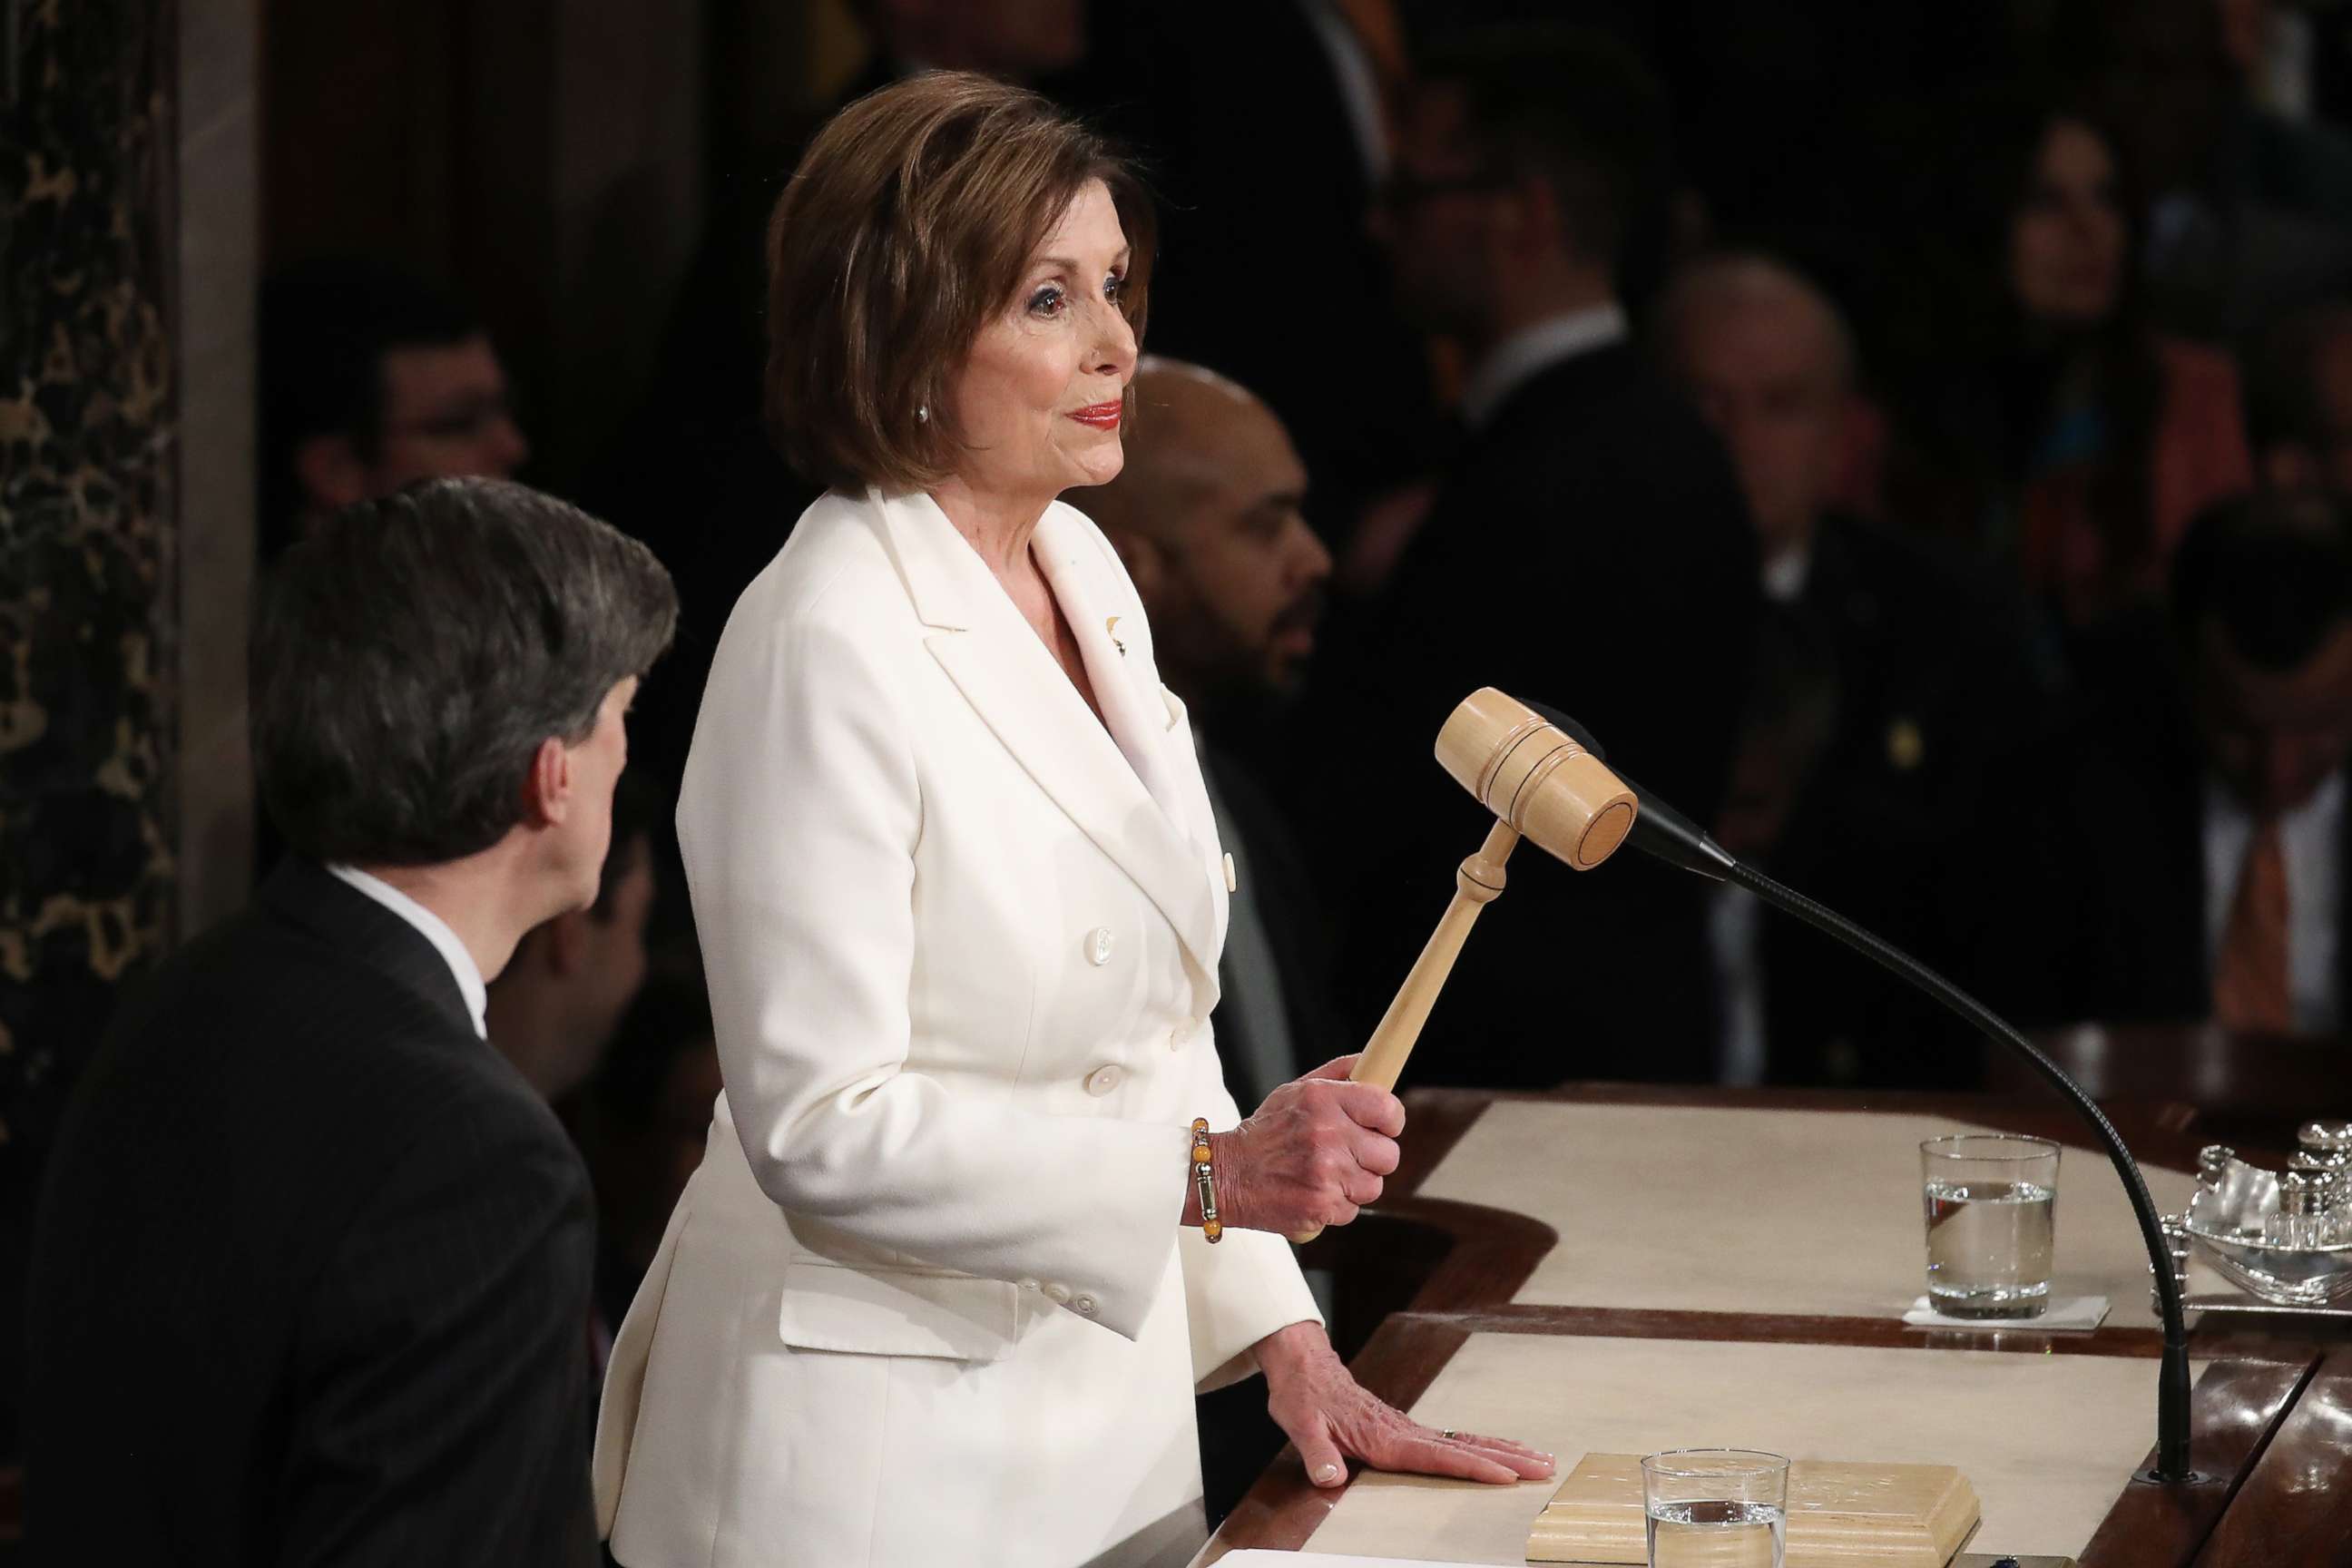 PHOTO: House Speaker Rep. Nancy Pelosi holds the gavel ahead of the State of the Union address in the chamber of the U.S. House of Representatives on Feb. 04, 2020, in Washington, DC.